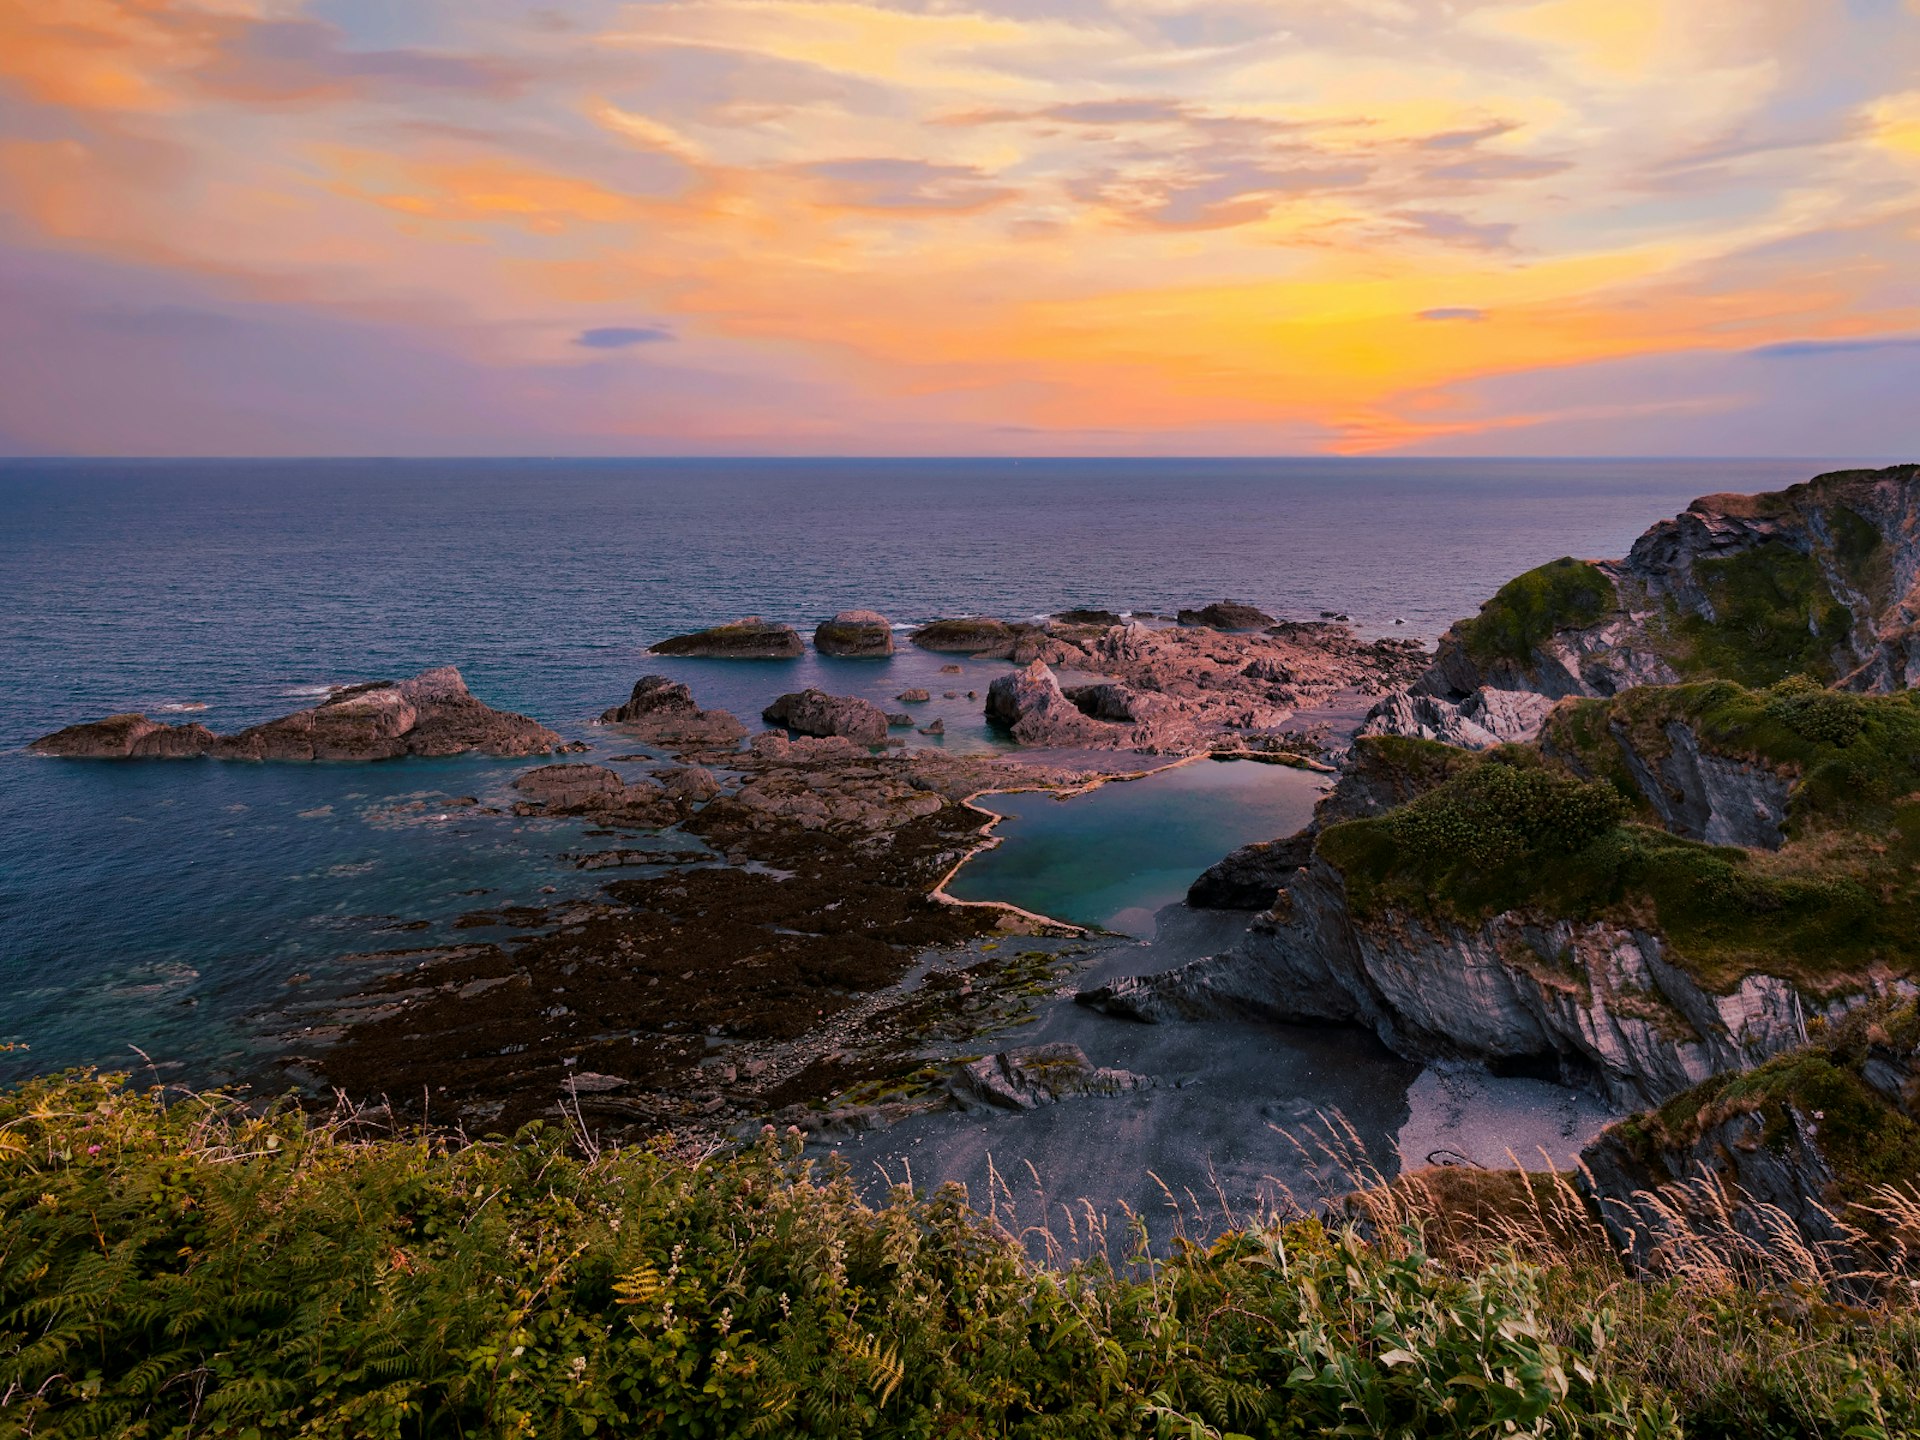 A sunset over the rocks pools of Tunnels Beaches in Devon